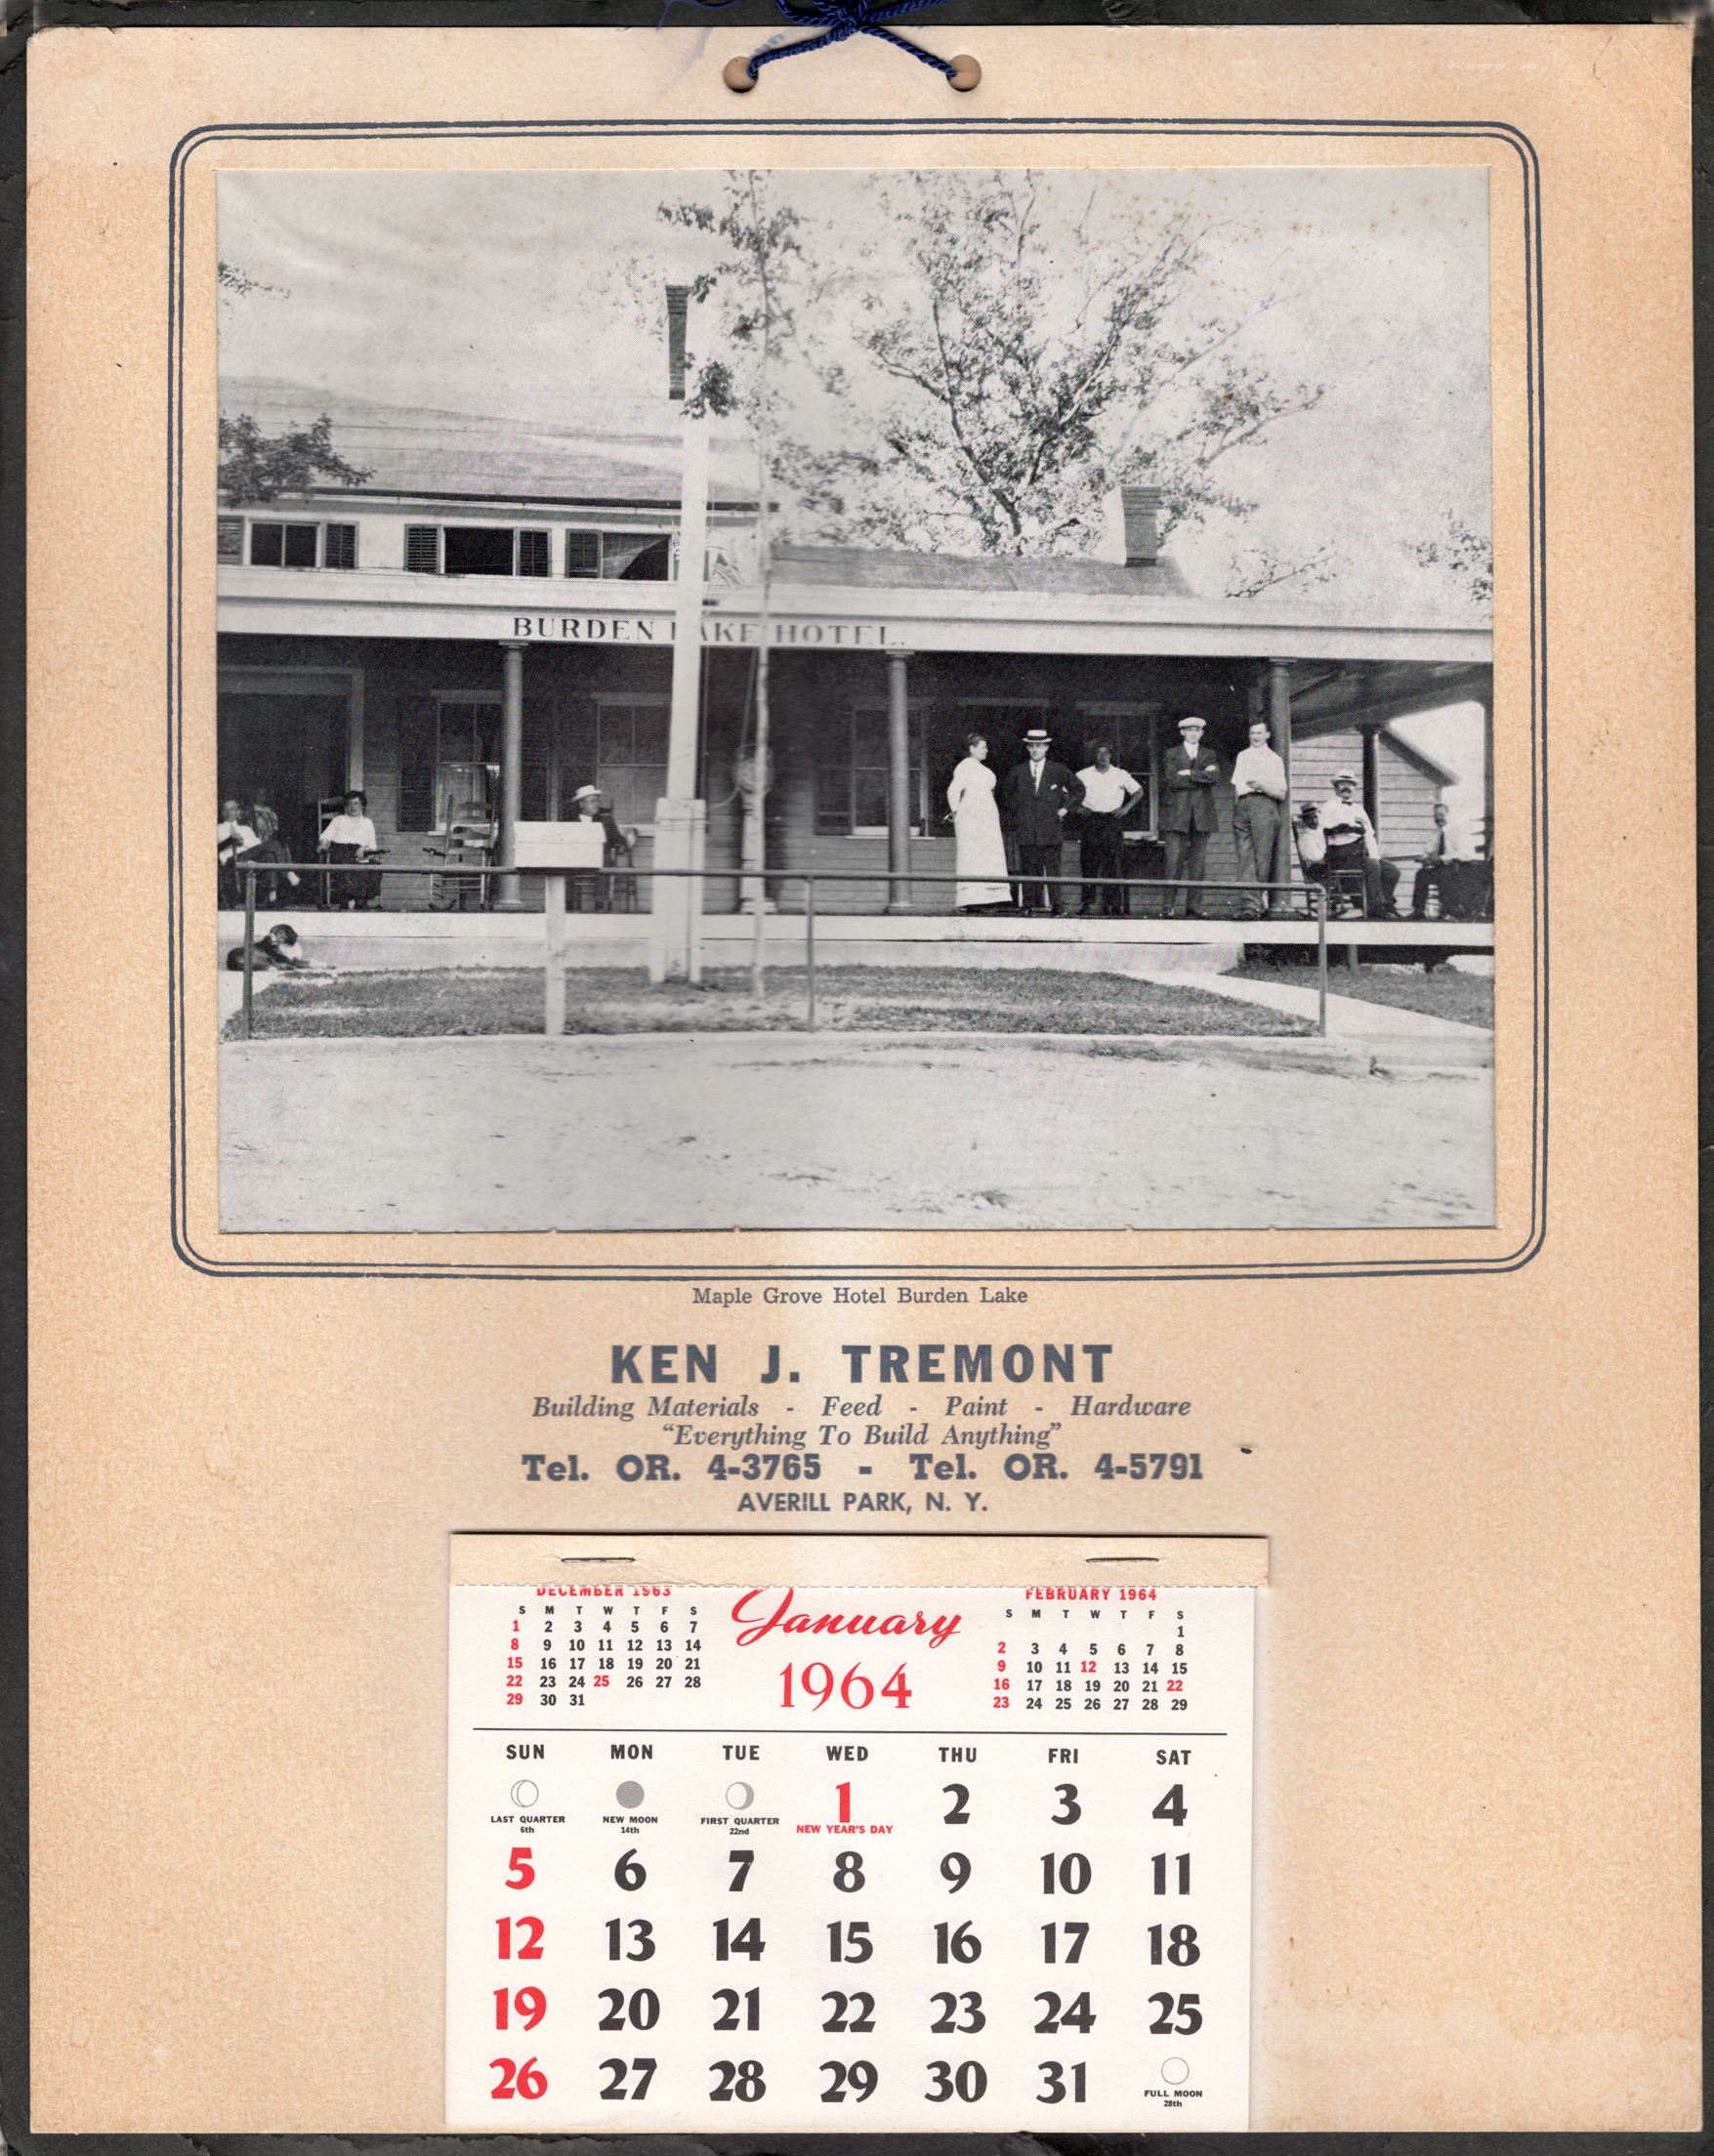 Tremont Lumber Company calendar from 1964.